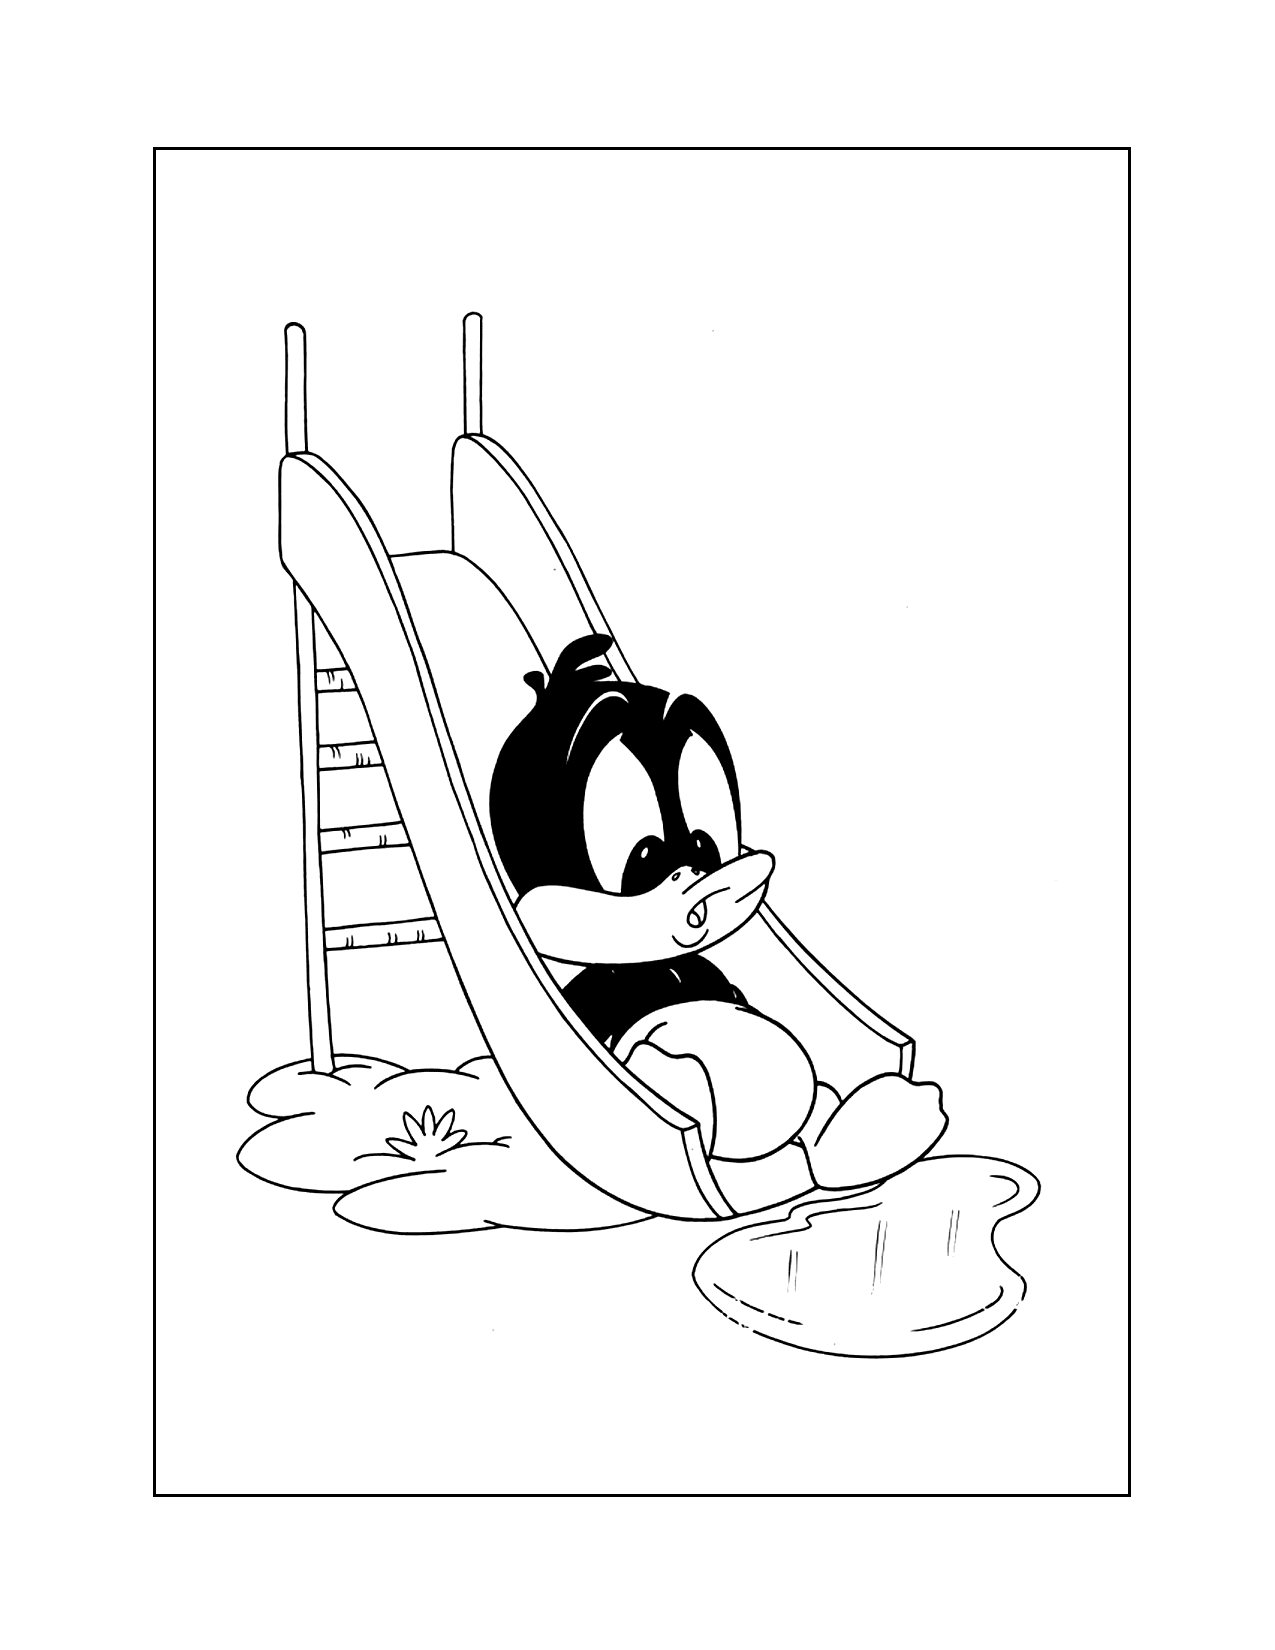 Baby Daffy Puddle Off Slide Coloring Page